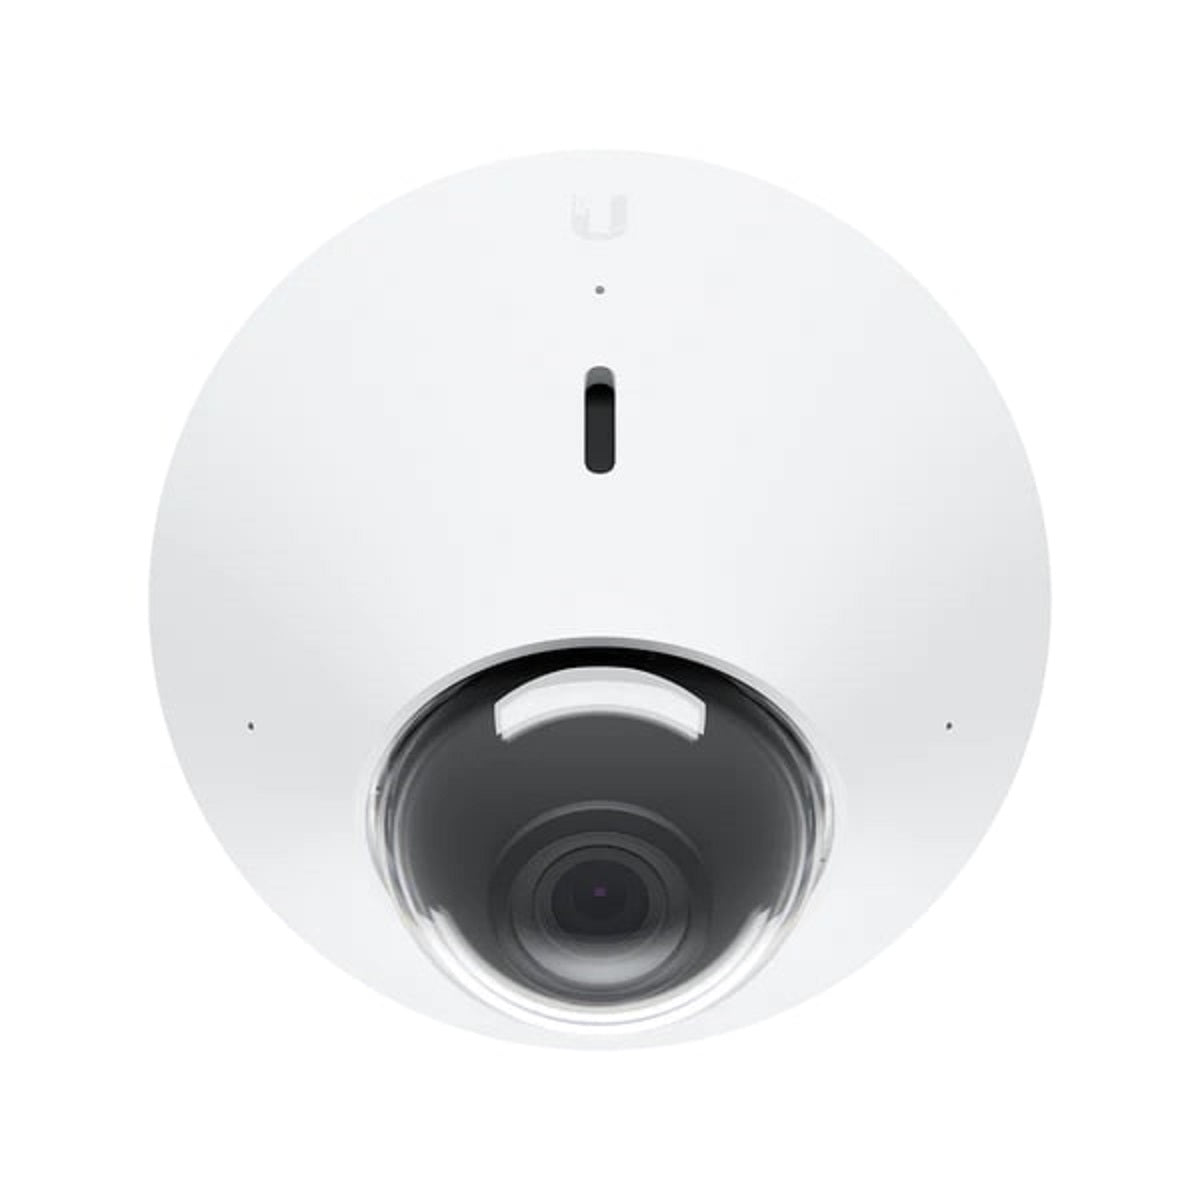 Ubiquiti UVC-G4-DOME Protect White Outdoor Security IP Camera